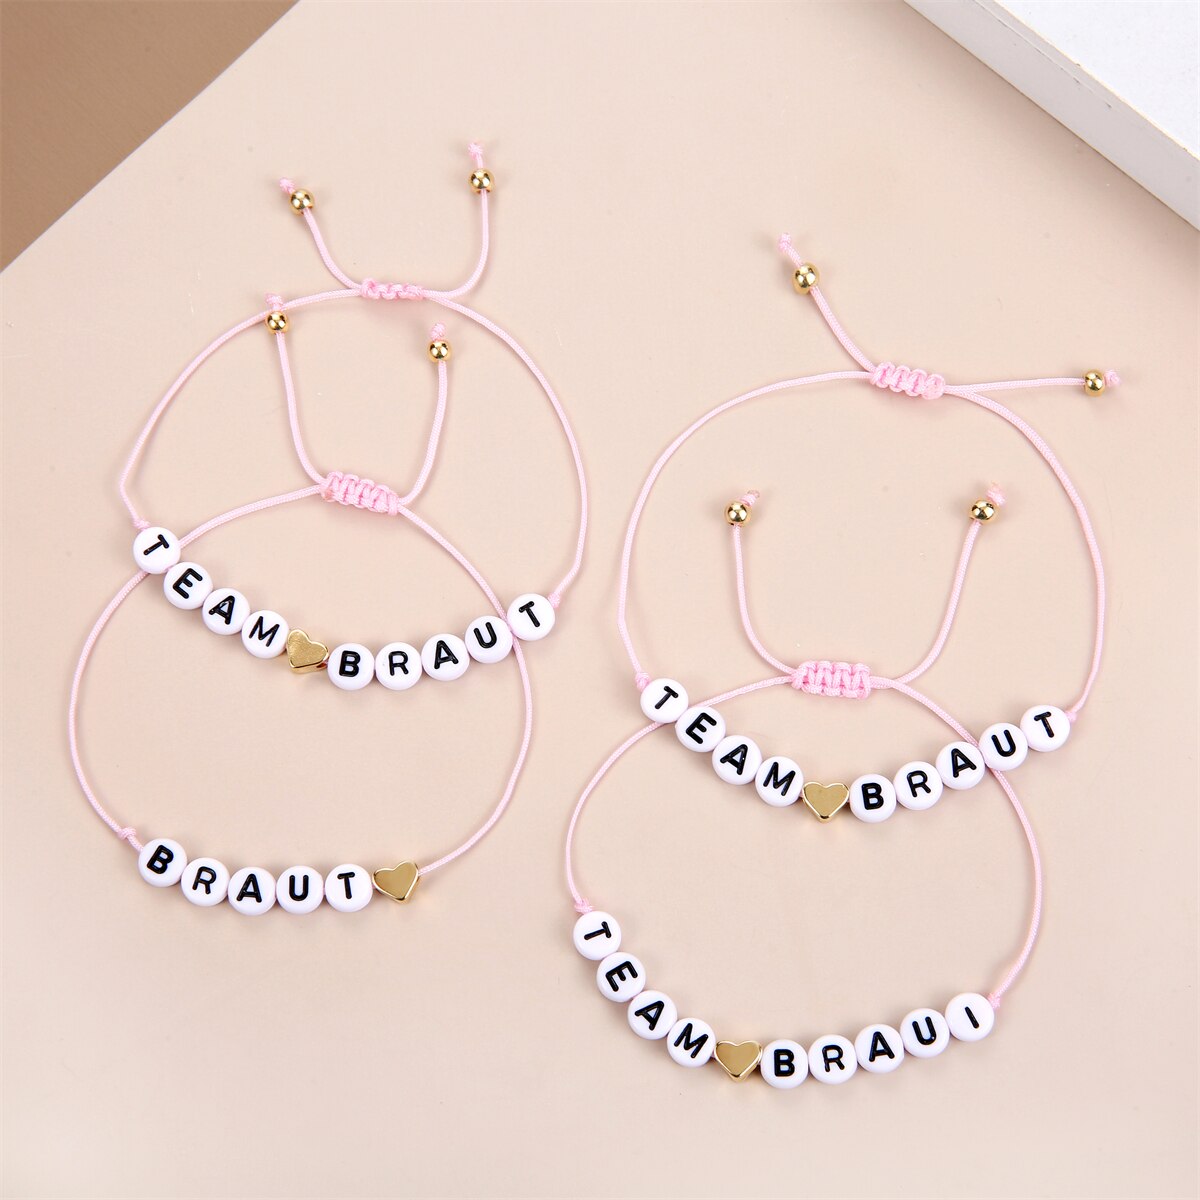 12pcs/set Acrylic Letter Charms Bracelets for Women Handmade Braided Bracelet Bangles Anklets Couples Wedding Party Jewelry